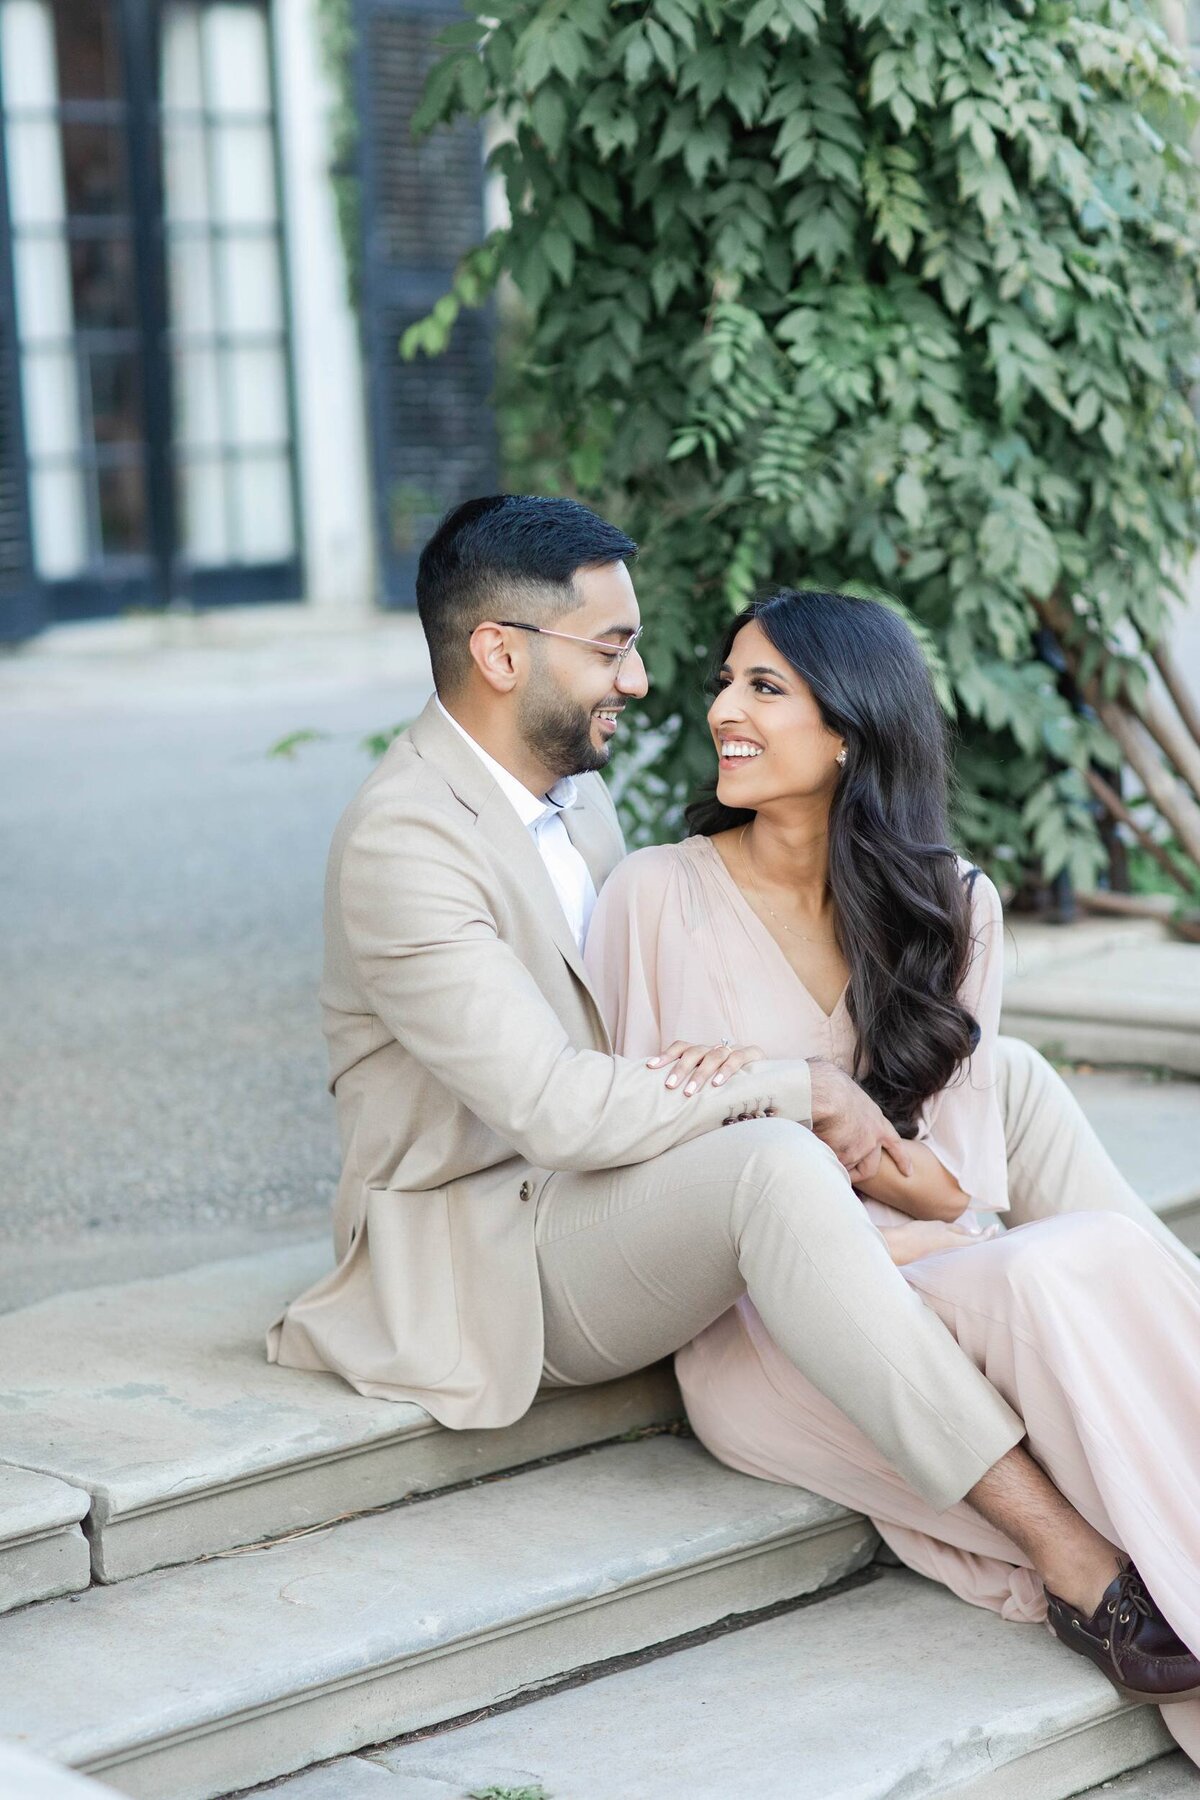 York-Glendon-Campus-Engagement-Photography-by-Azra_0021